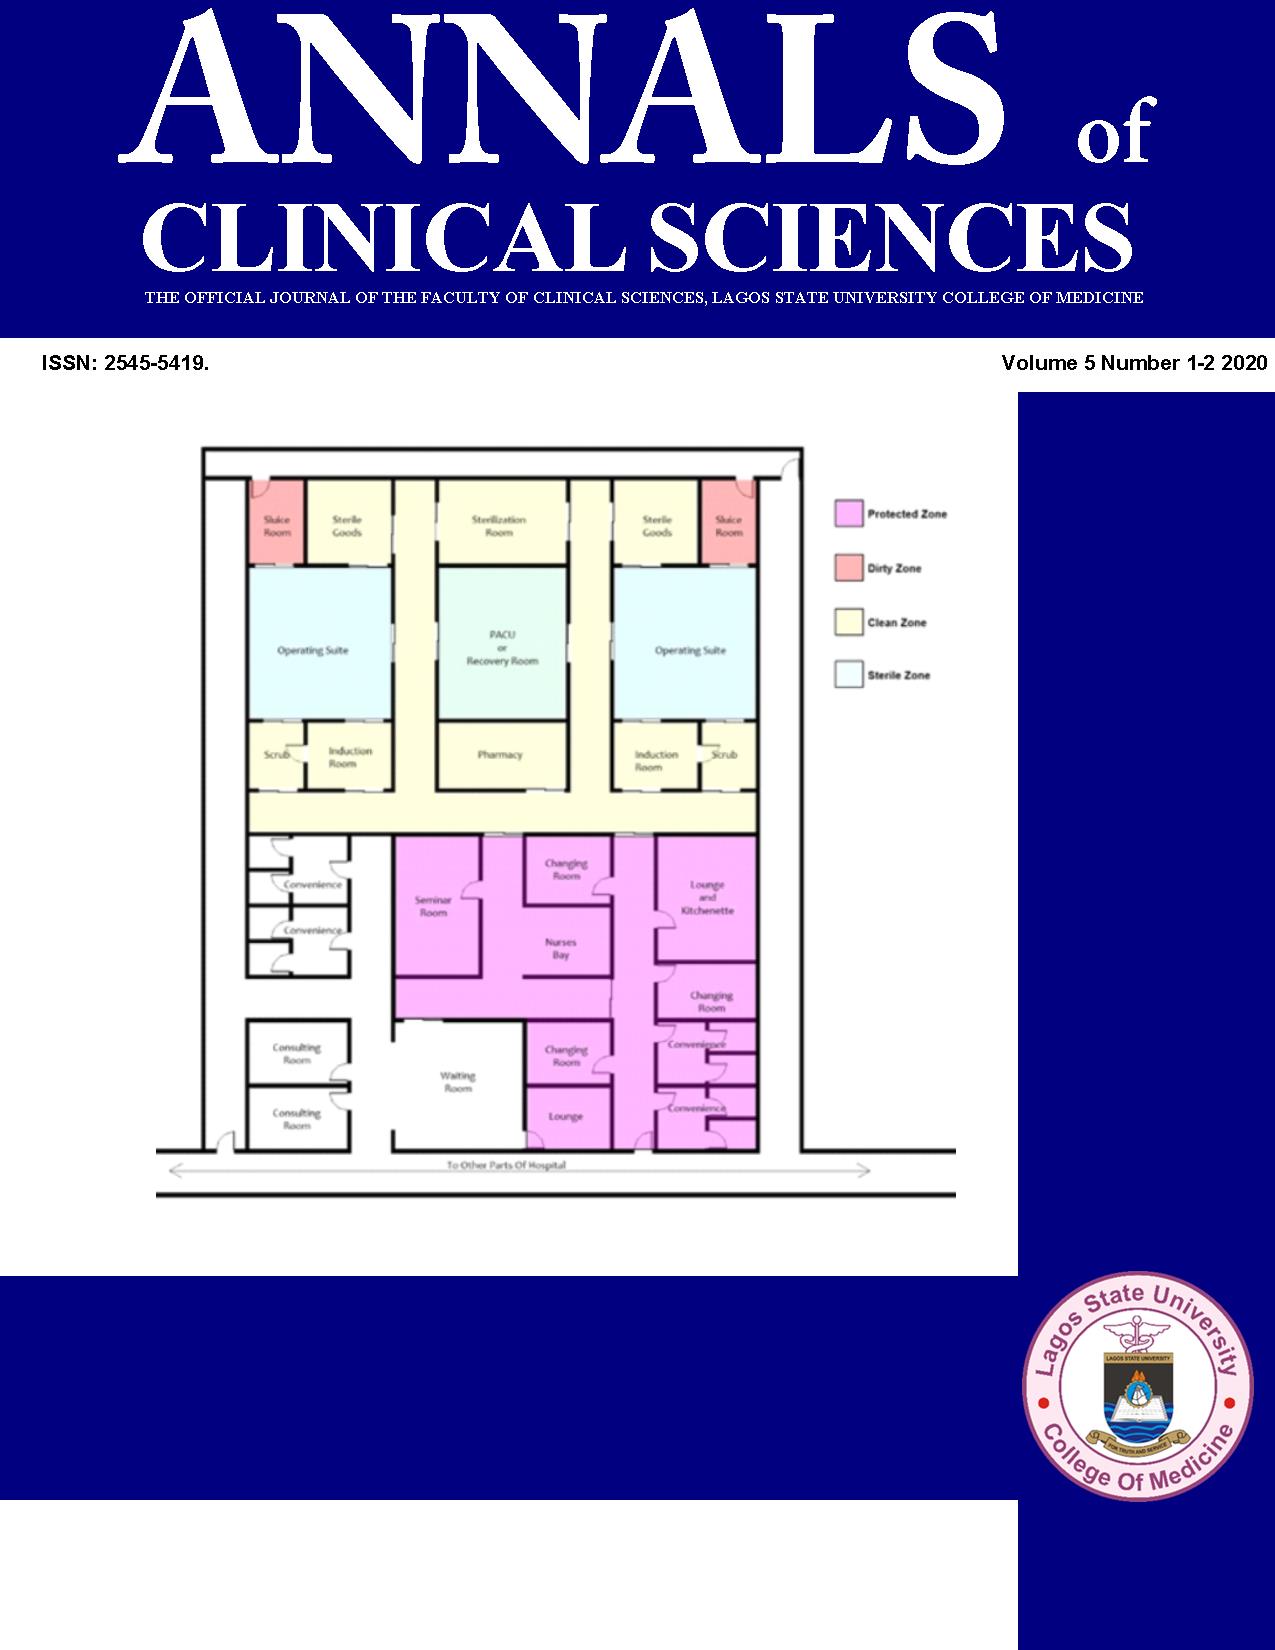 					View Vol. 5 No. 1-2 (2020): Annals of Clinical Sciences 
				